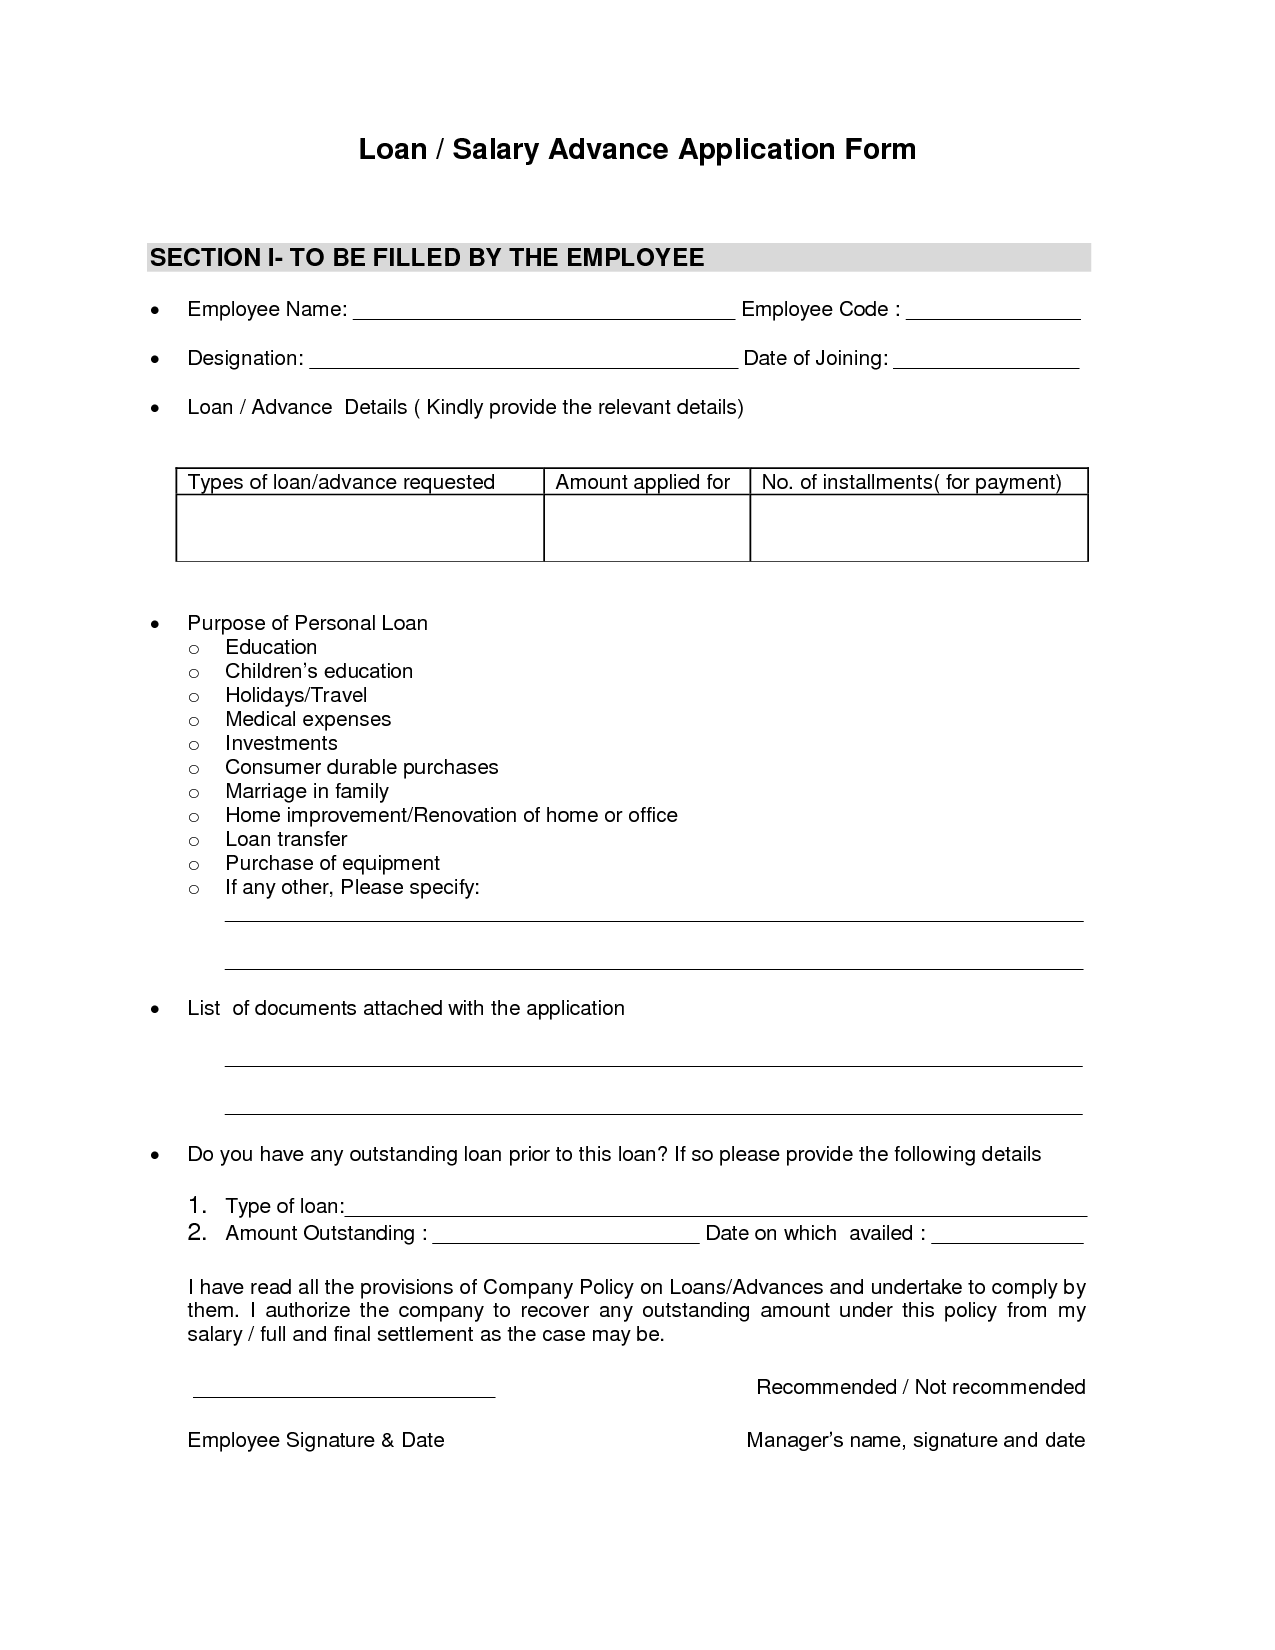 loan form - Free Printable Documents